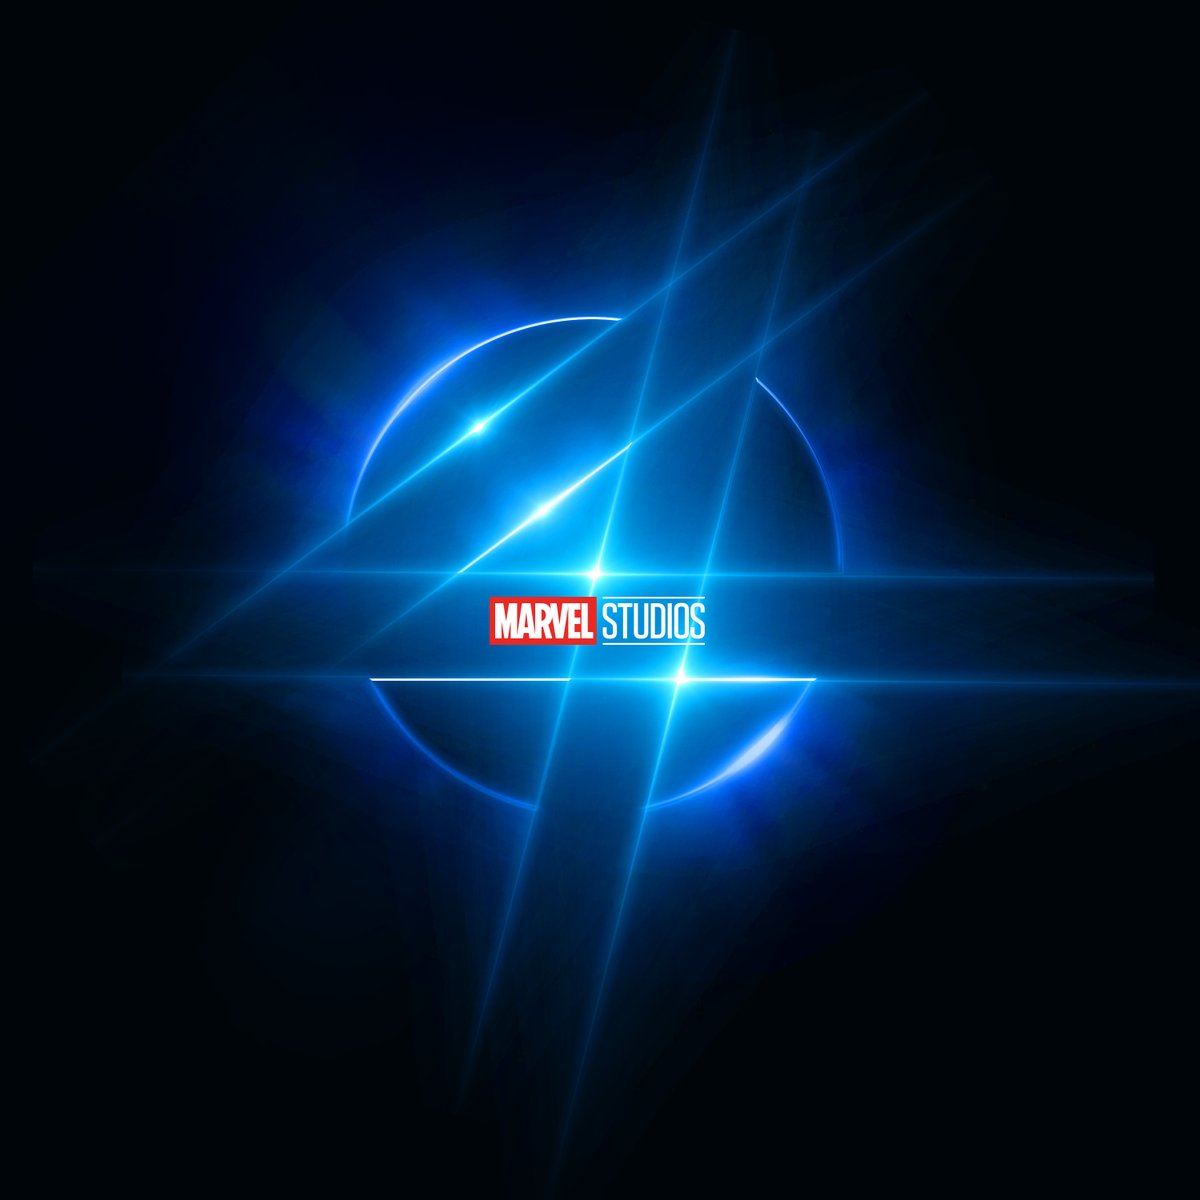 Just announced at #D23Expo, Matt Shakman to direct Marvel Studios’ Fantastic Four. In theaters November 8, 2024.